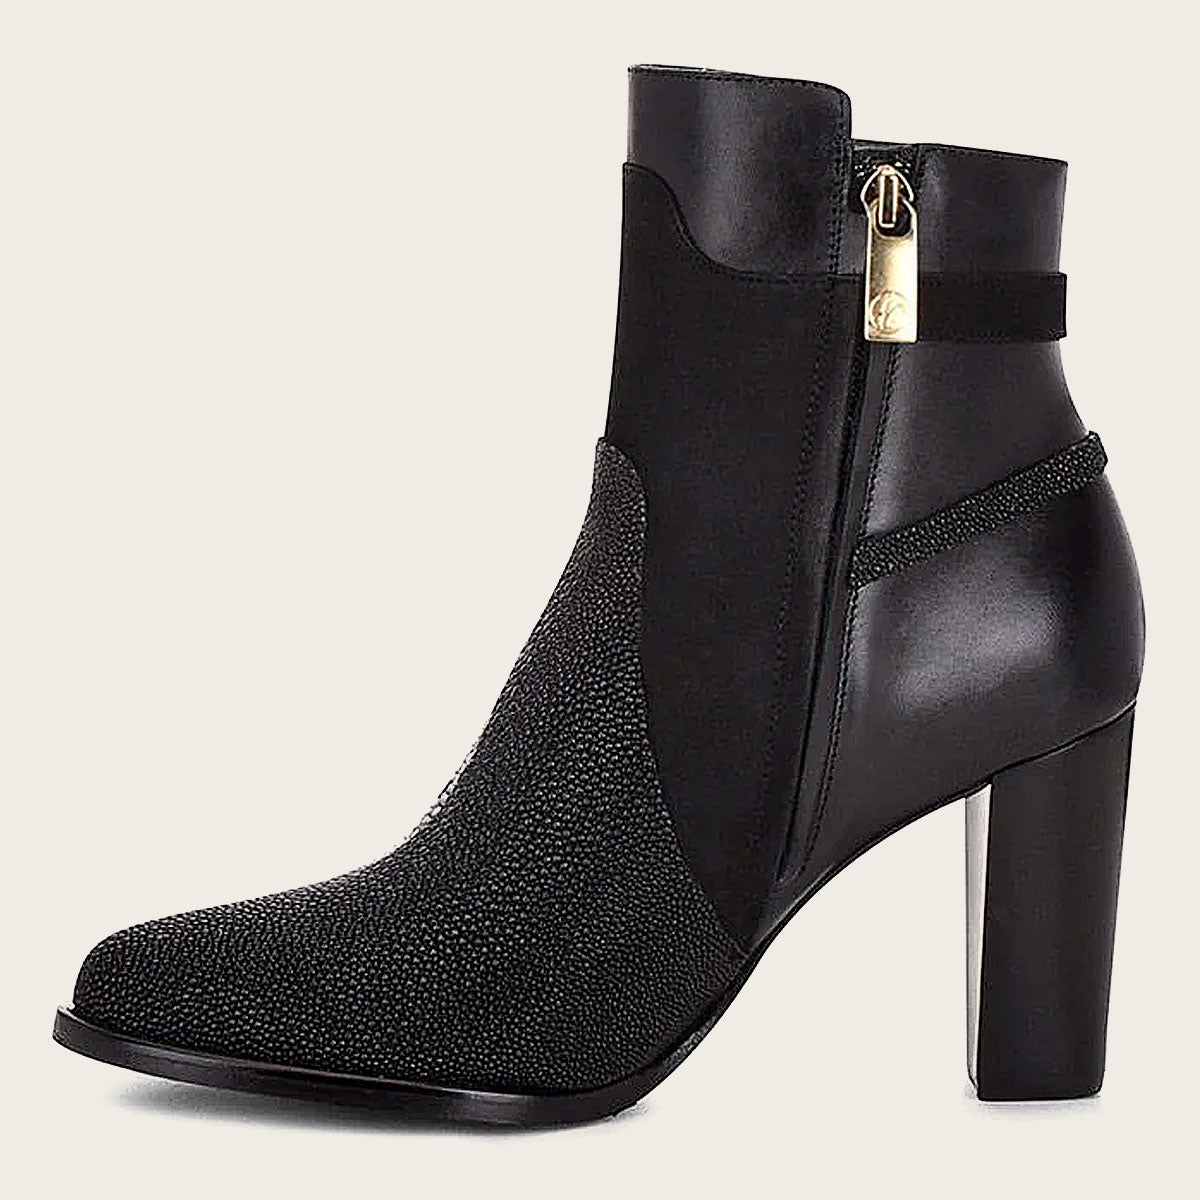 Close-up of black textured ankle boot with pointed toe, made of genuine exotic stingray leather.